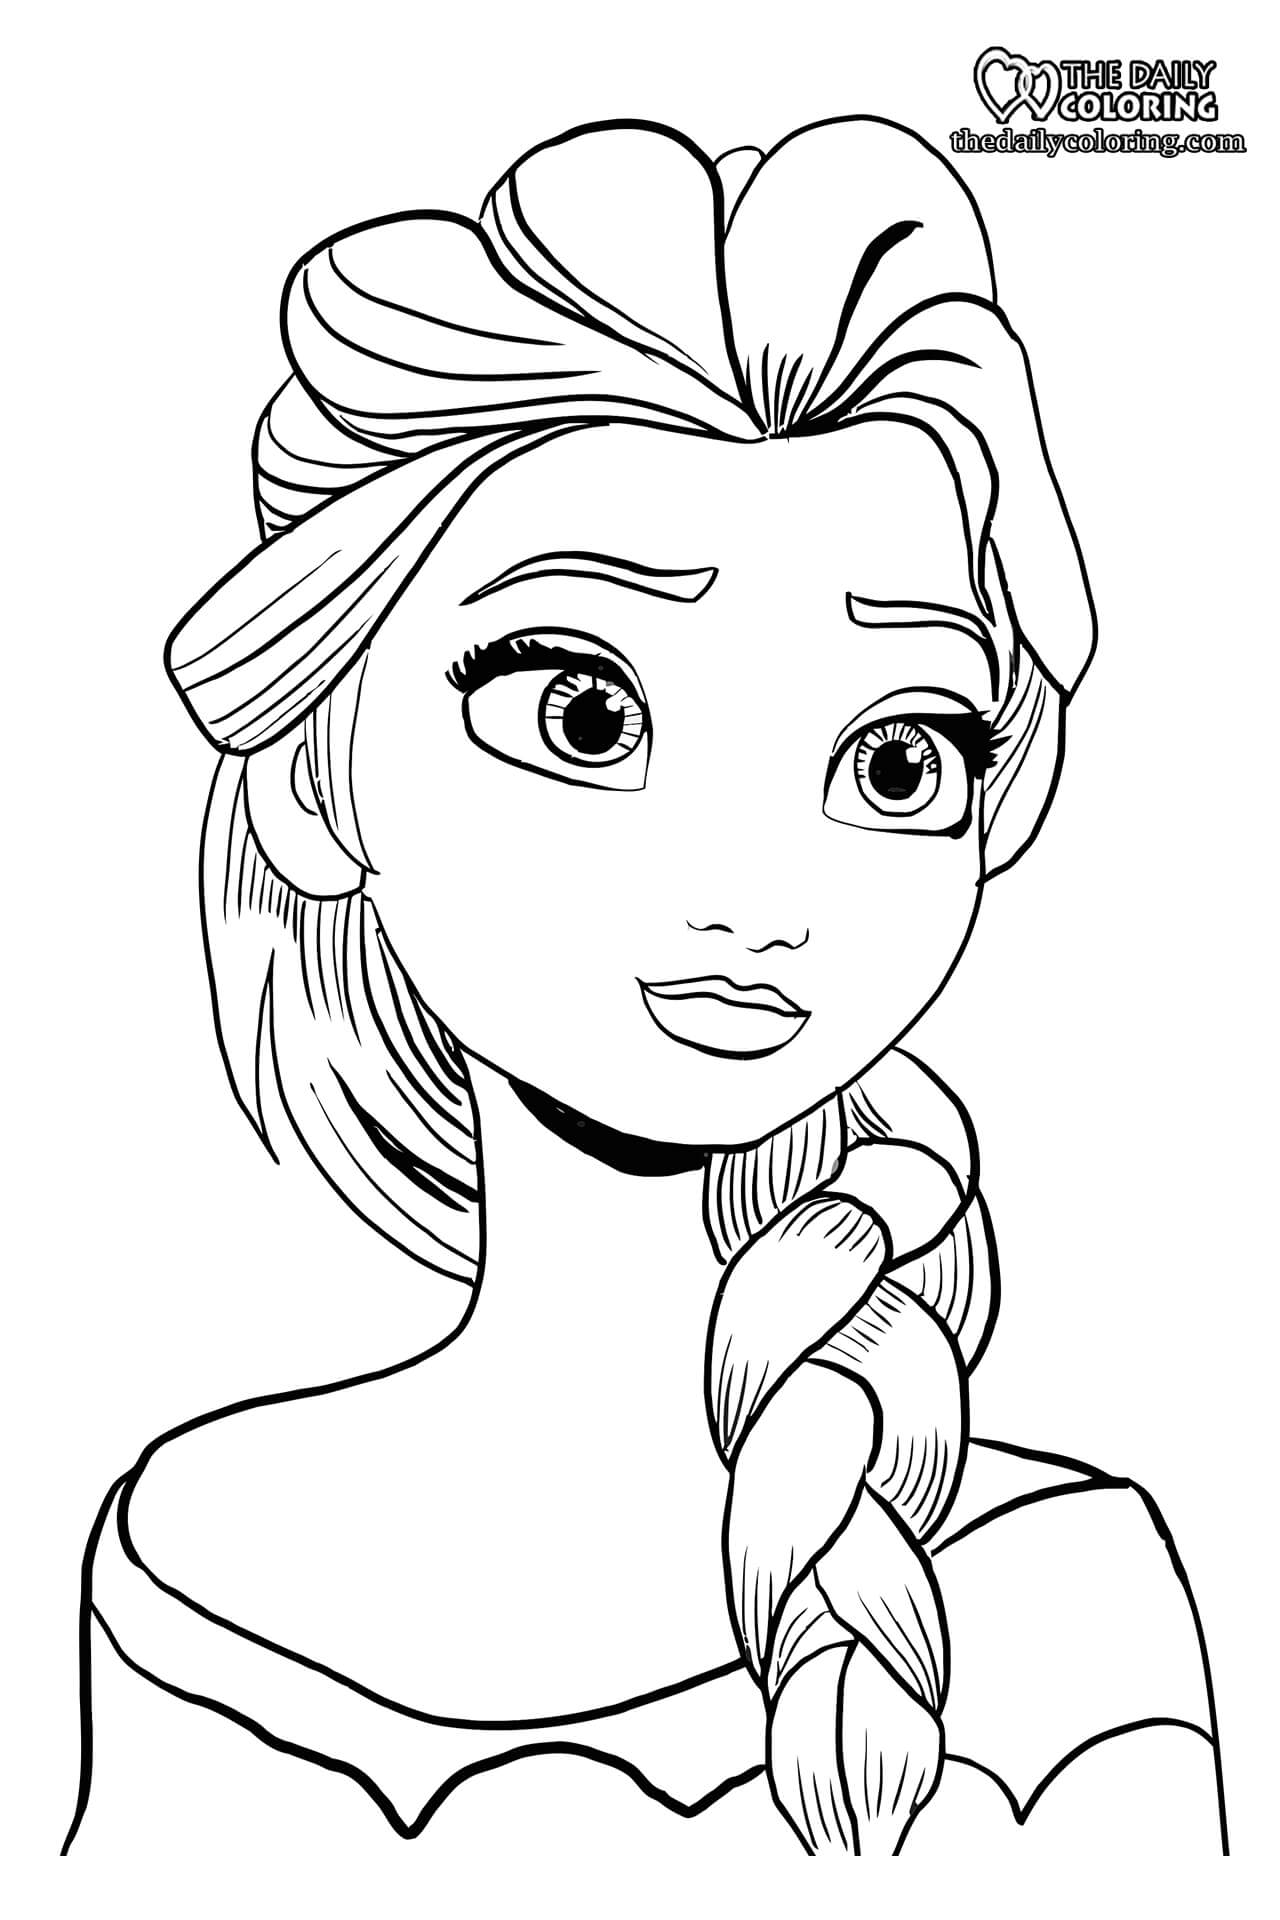 Elsa and Anna Coloring Pages [20 Pages]   The Daily Coloring